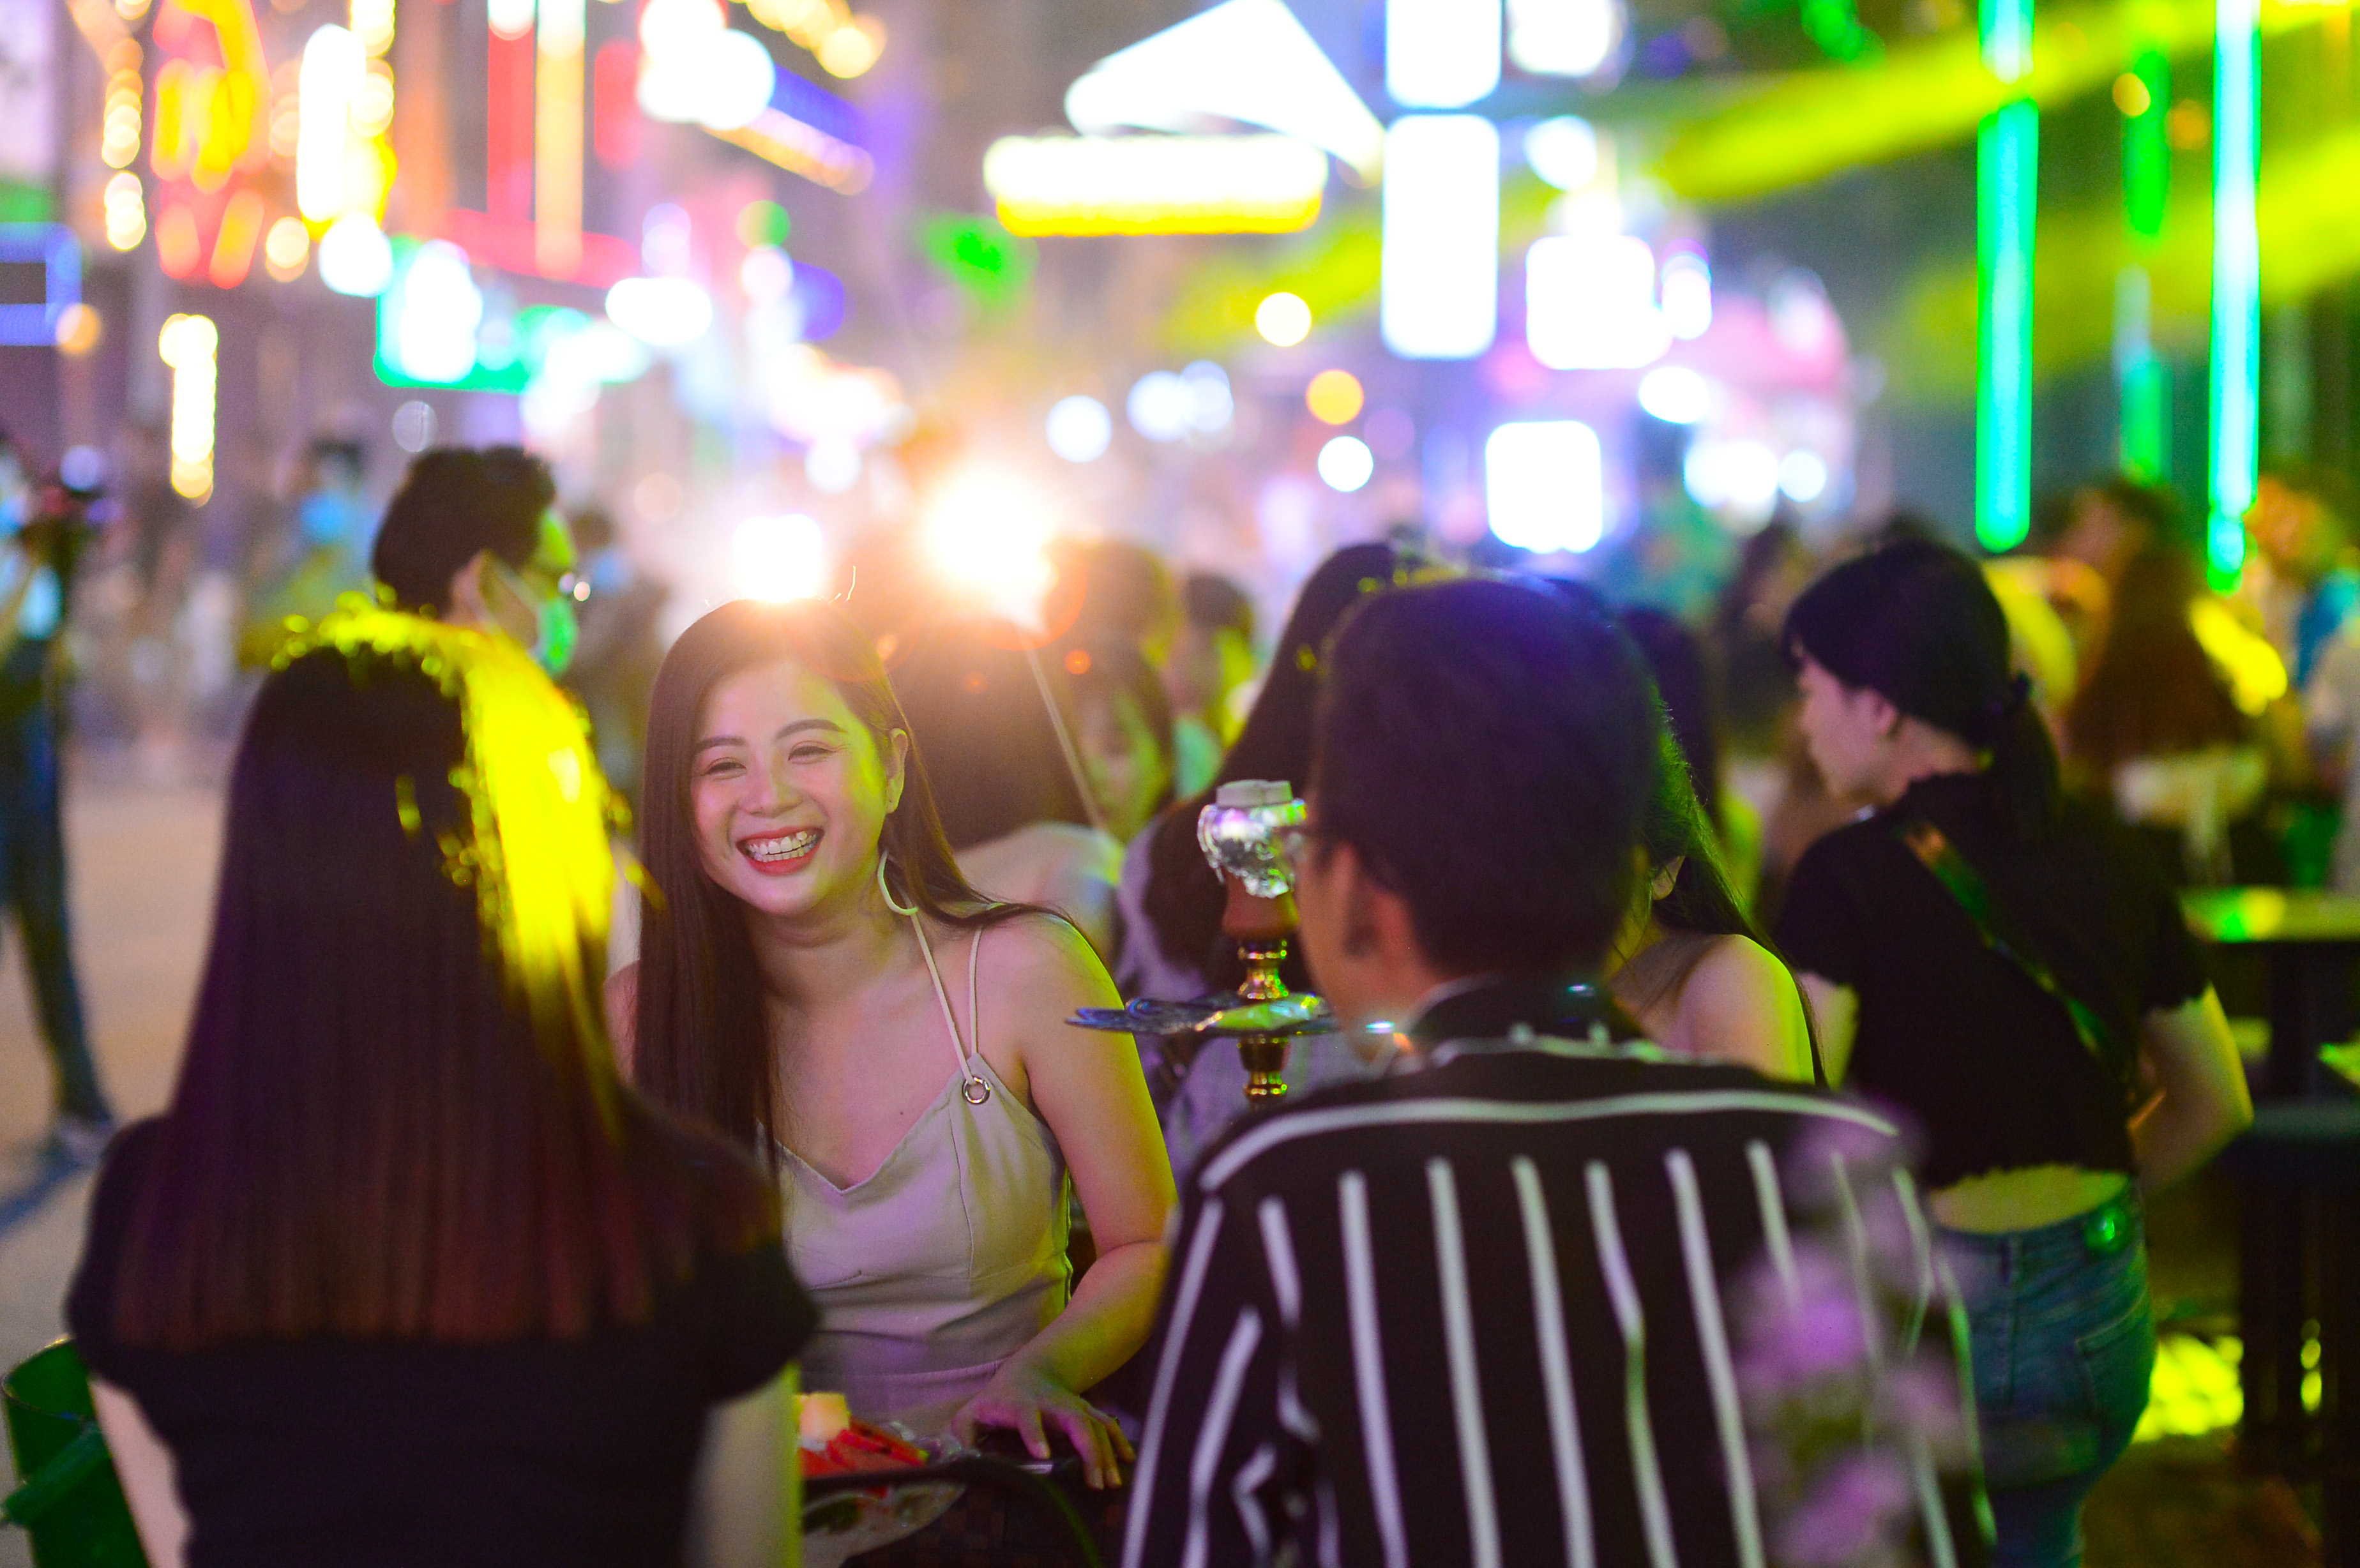 A woman is pictured while hanging out with her friend at a bar on Bui Vien Street in Ho Chi Minh City’s District 1 at around 9:30pm on September 8, 2020. Photo: Quang Dinh / Tuoi Tre